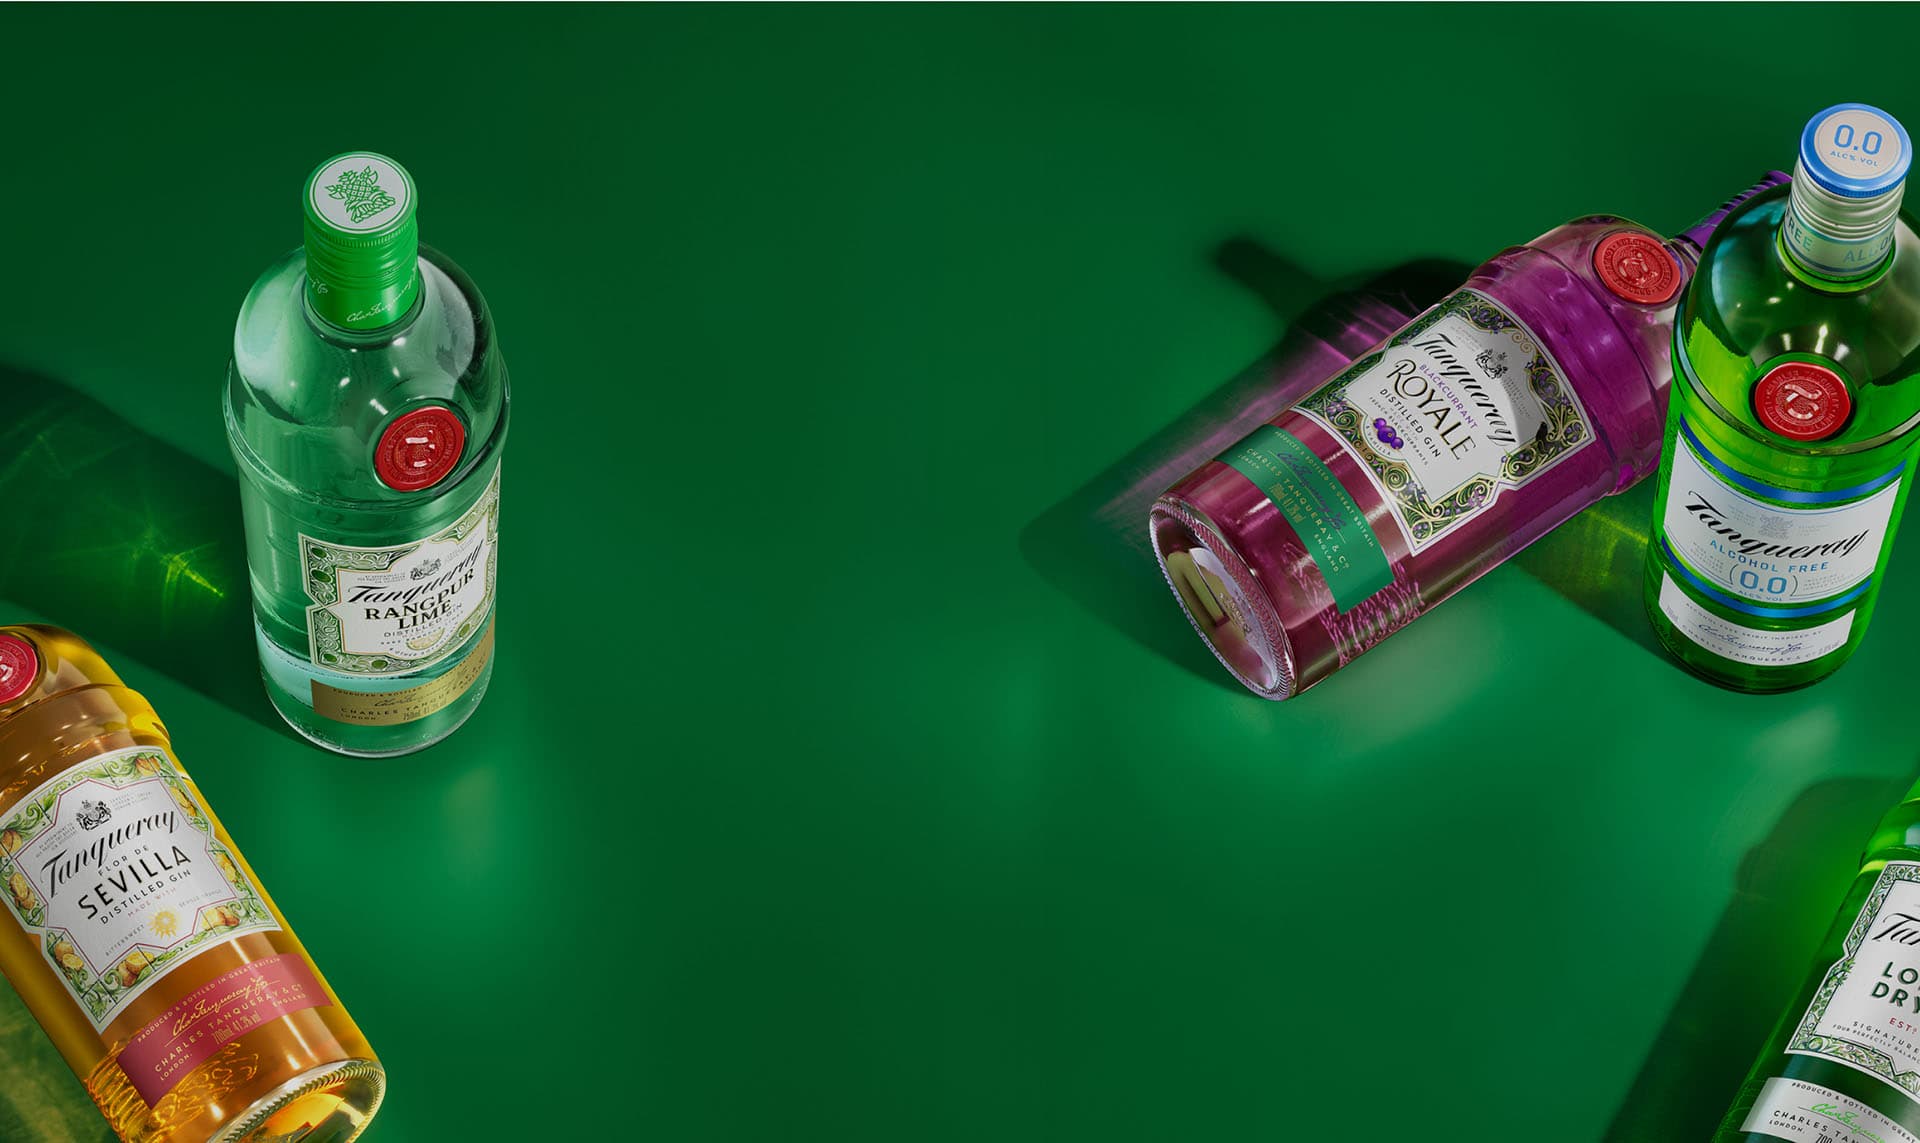 Five different Tanqueray bottles.